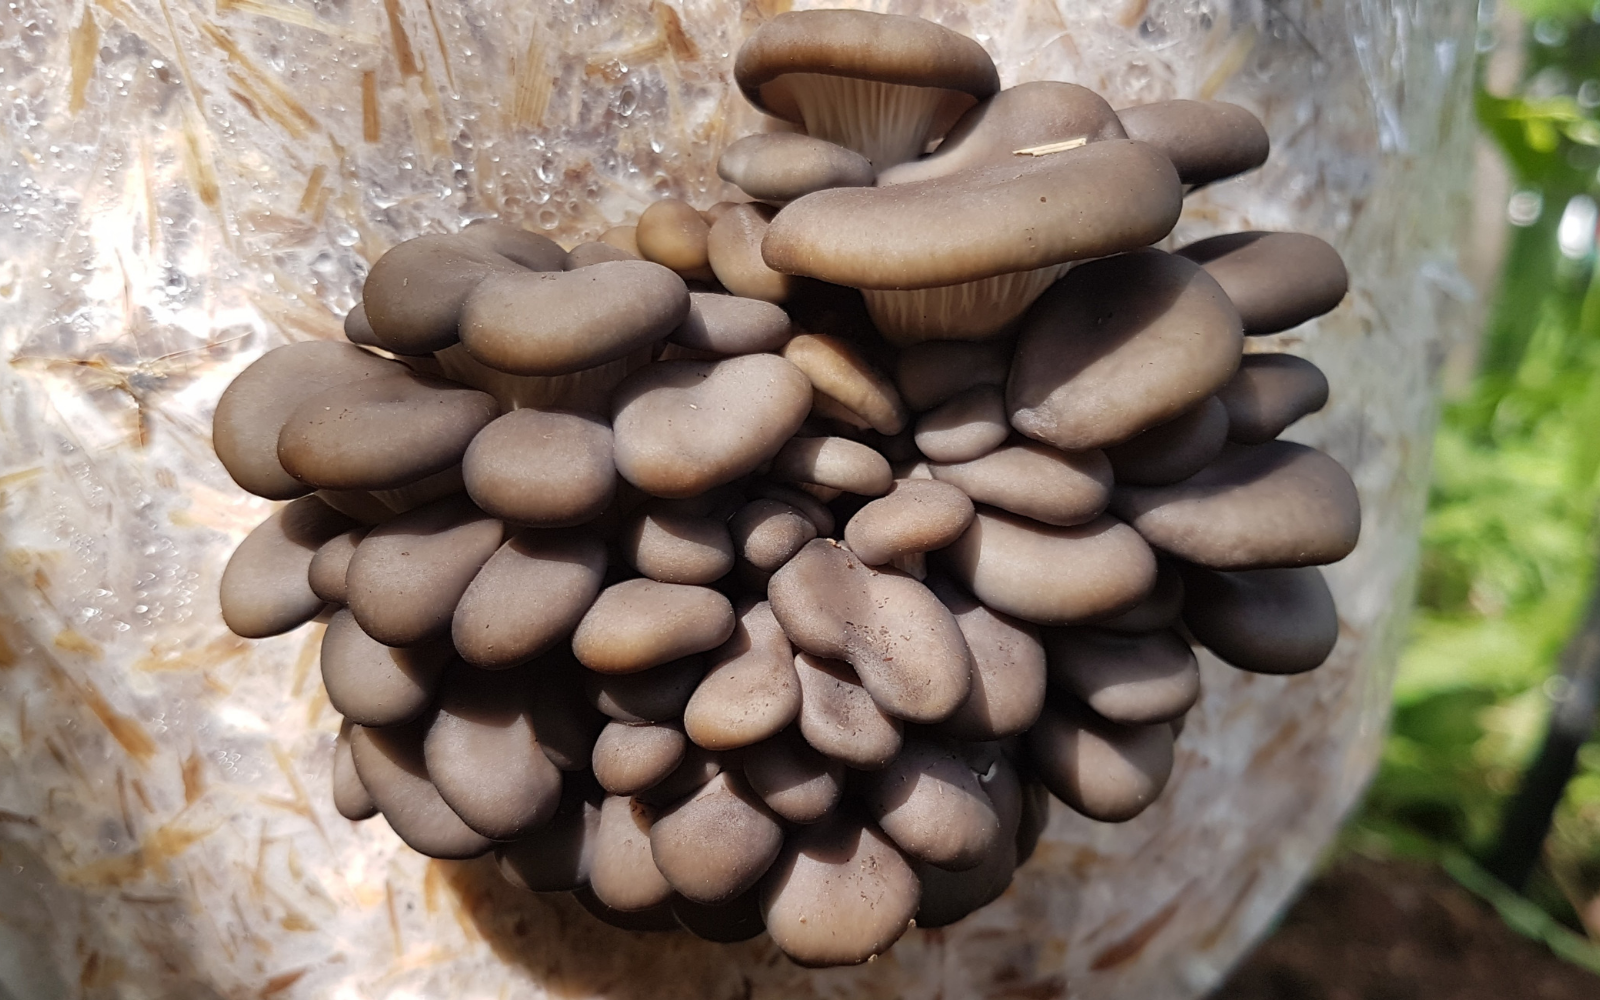 https://learn.freshcap.com/wp-content/uploads/2017/06/1600x1000-oyster-mushrooms.png